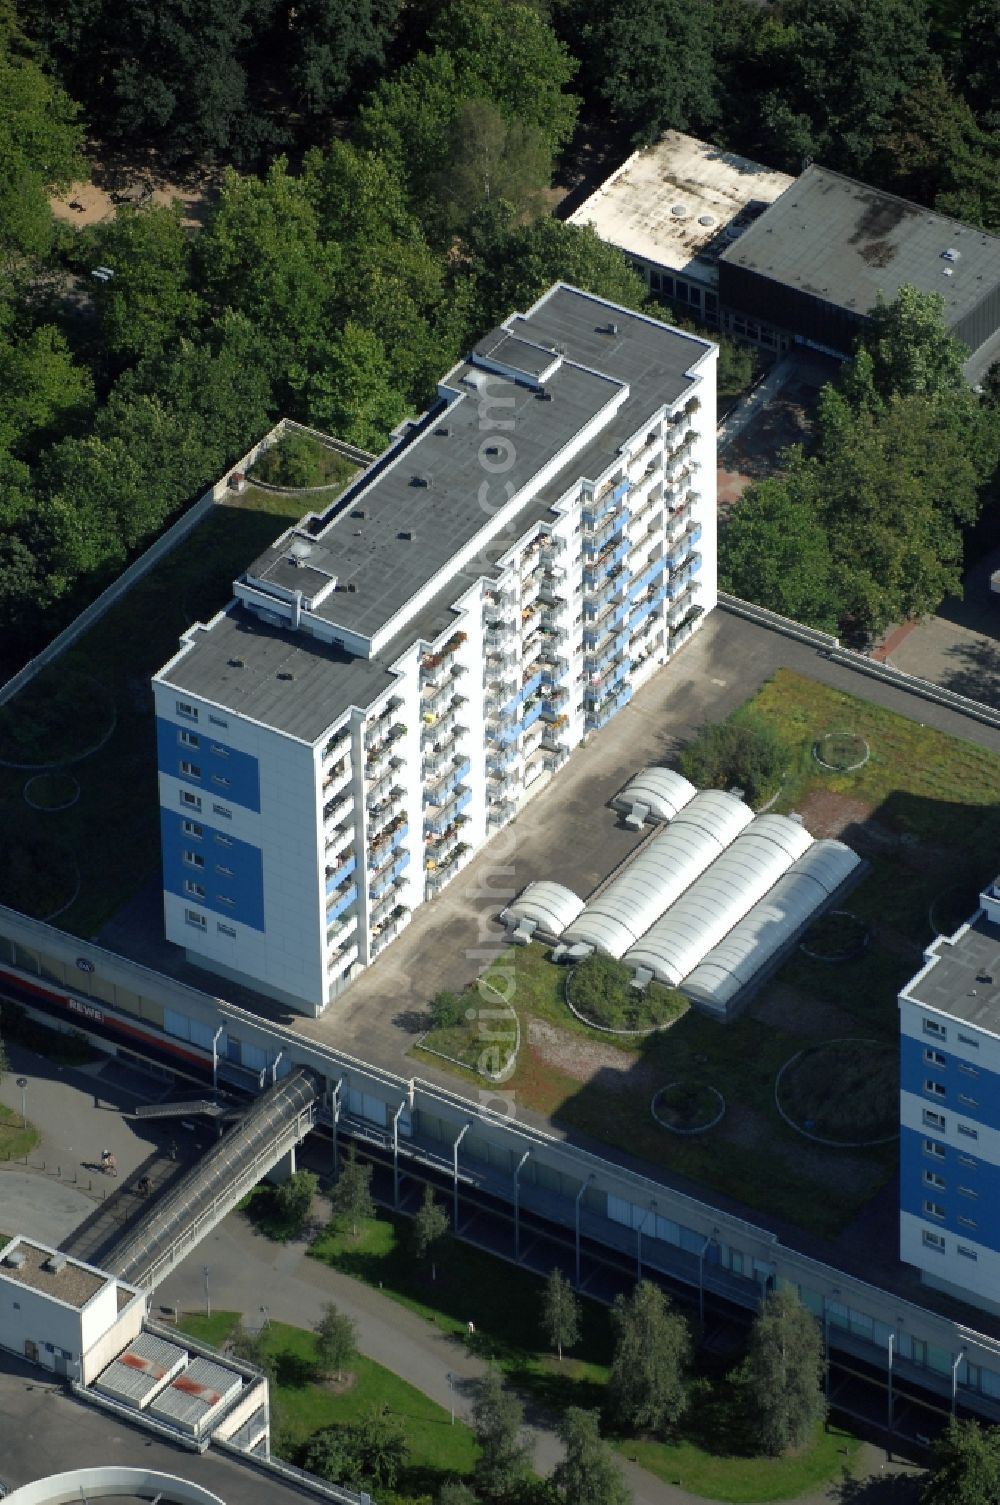 Norderstedt from above - Roof and wall structures in residential area of a multi-family house settlement on Herold Center in Norderstedt in the state Schleswig-Holstein, Germany